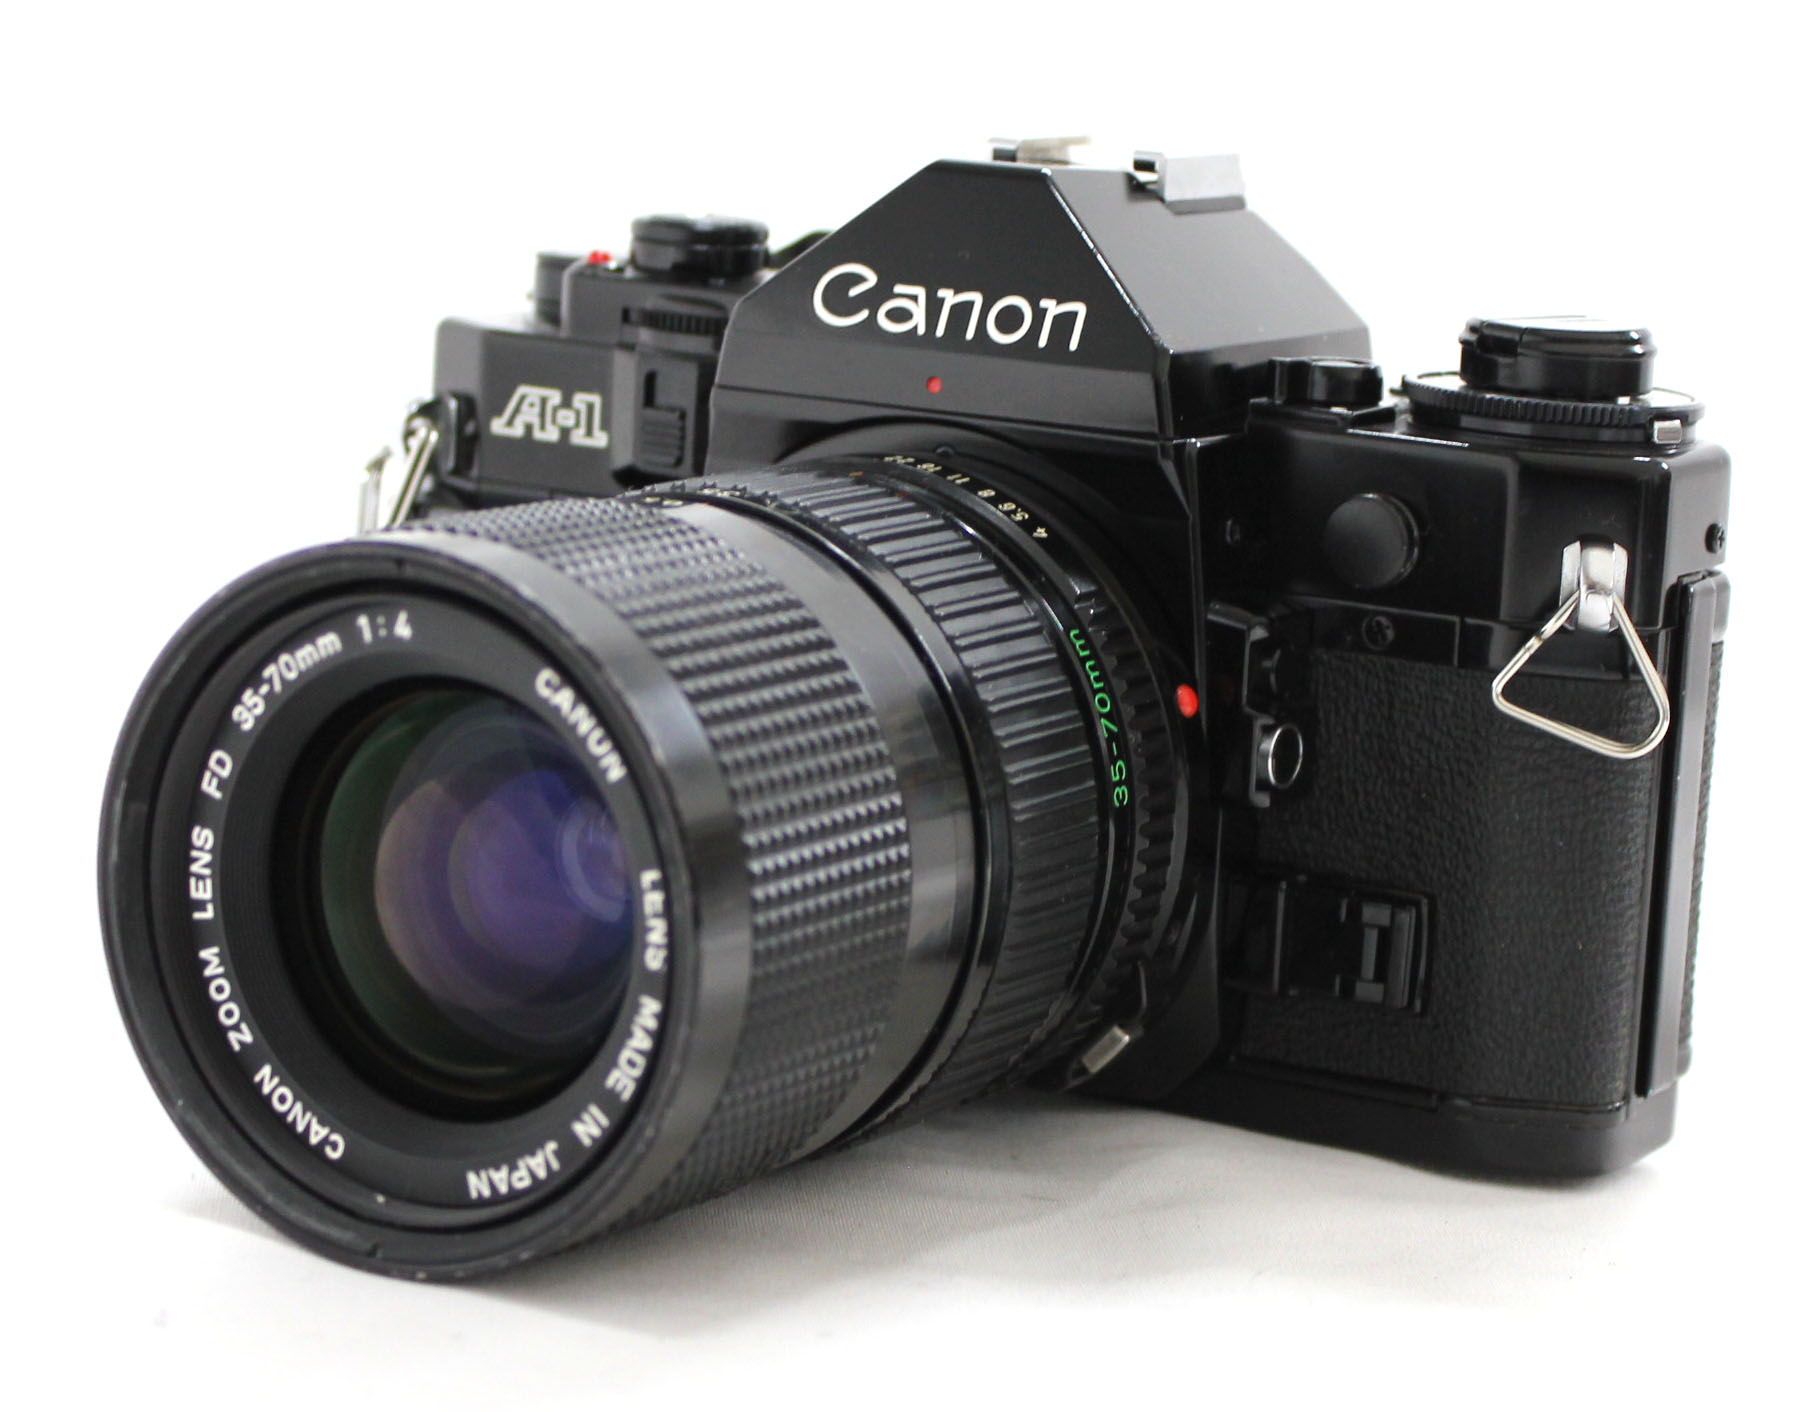 [Exc++++] Canon A-1 35mm SLR Film Camera with New FD 35-70mm F/4 Zoom Lens from Japan